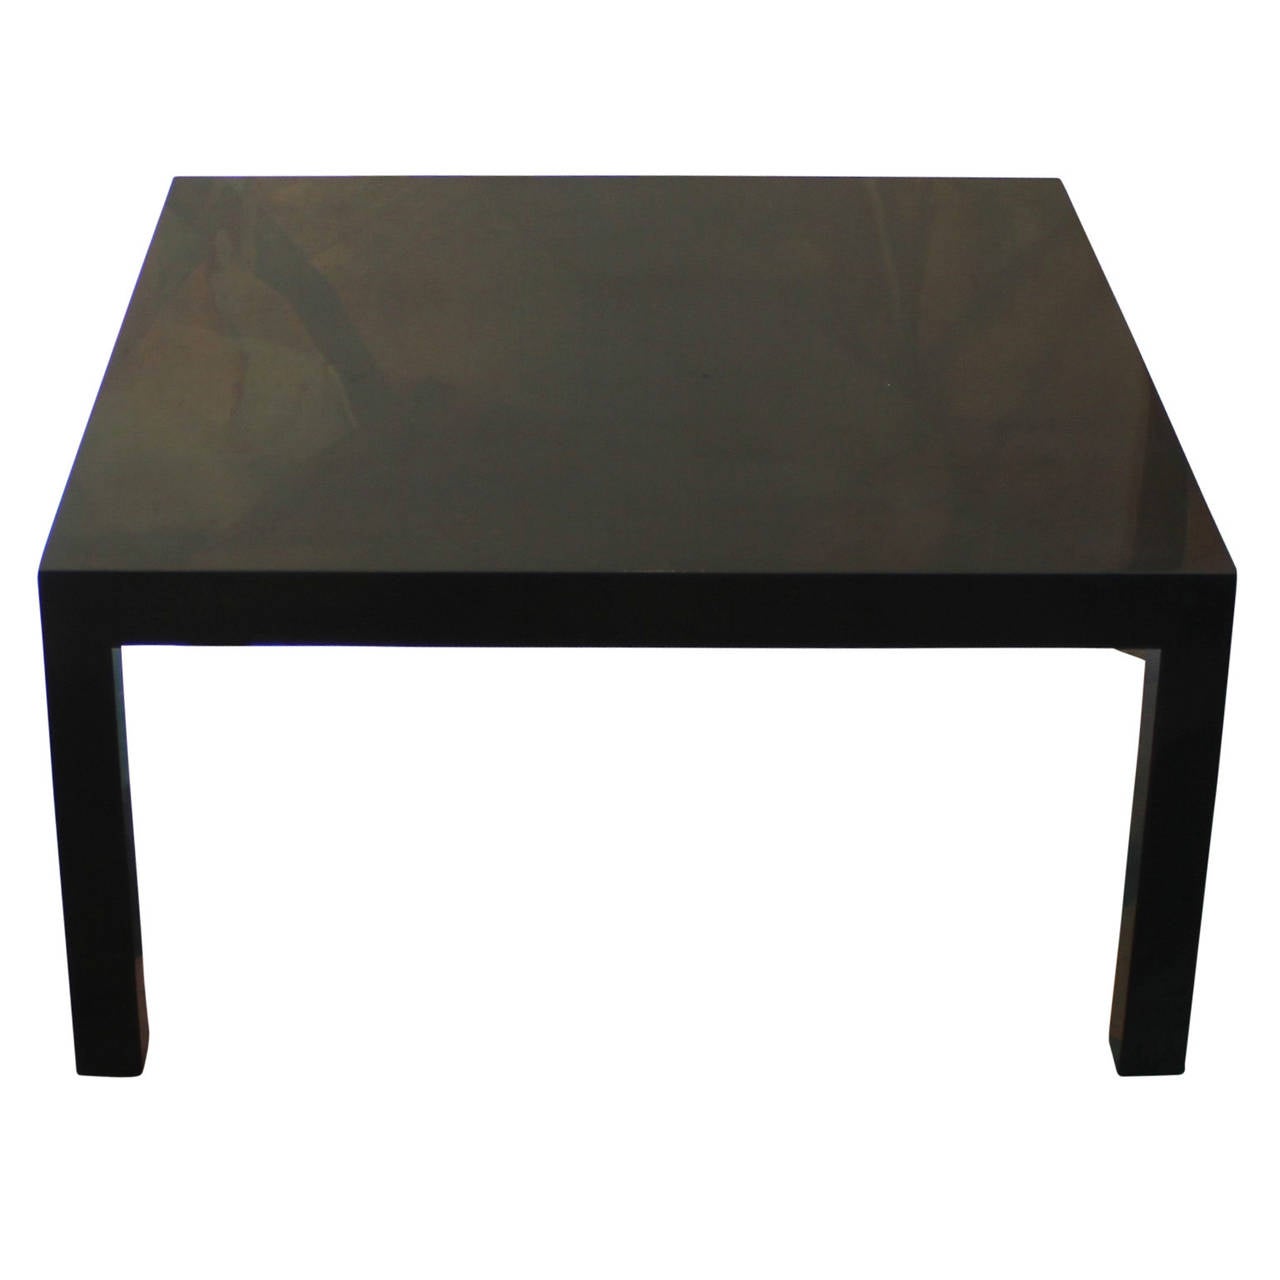 Dunbar Parsons coffee table finished in a luxe, high gloss black lacquer. Table retains original green lable.